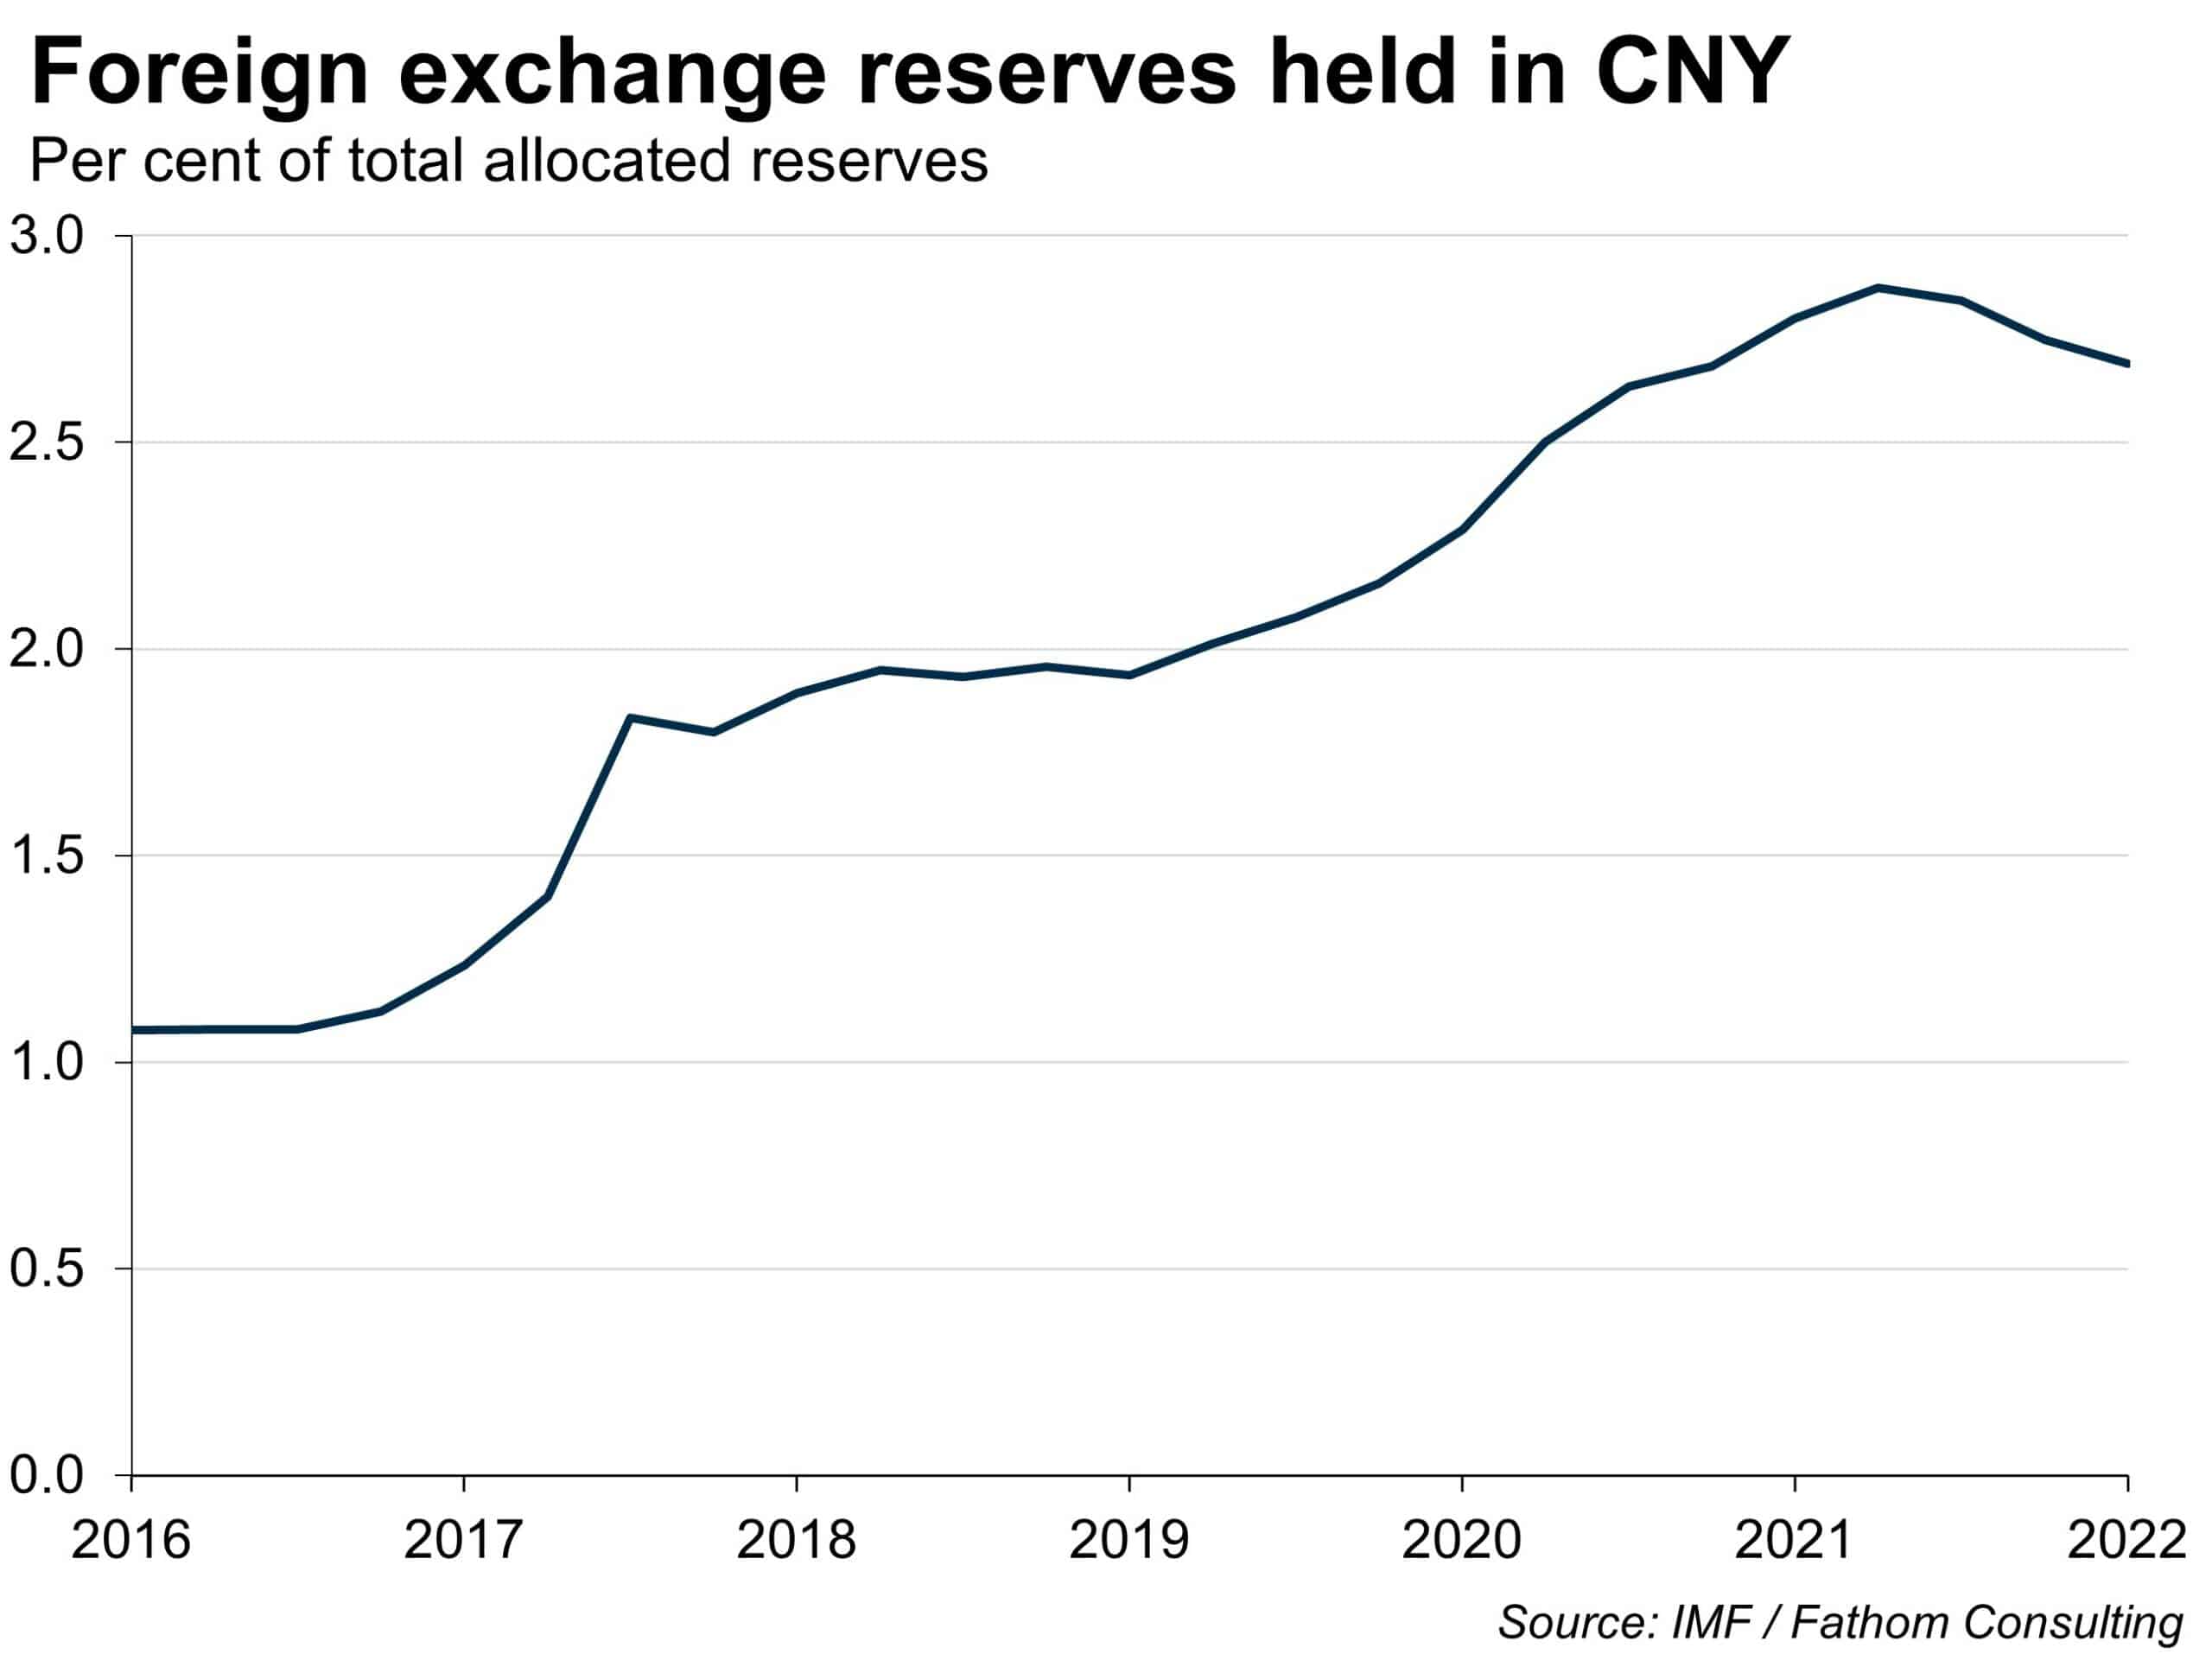 FX reserves held in CNY, 2016 to 2022, data indicates an upward trend until mid 2021